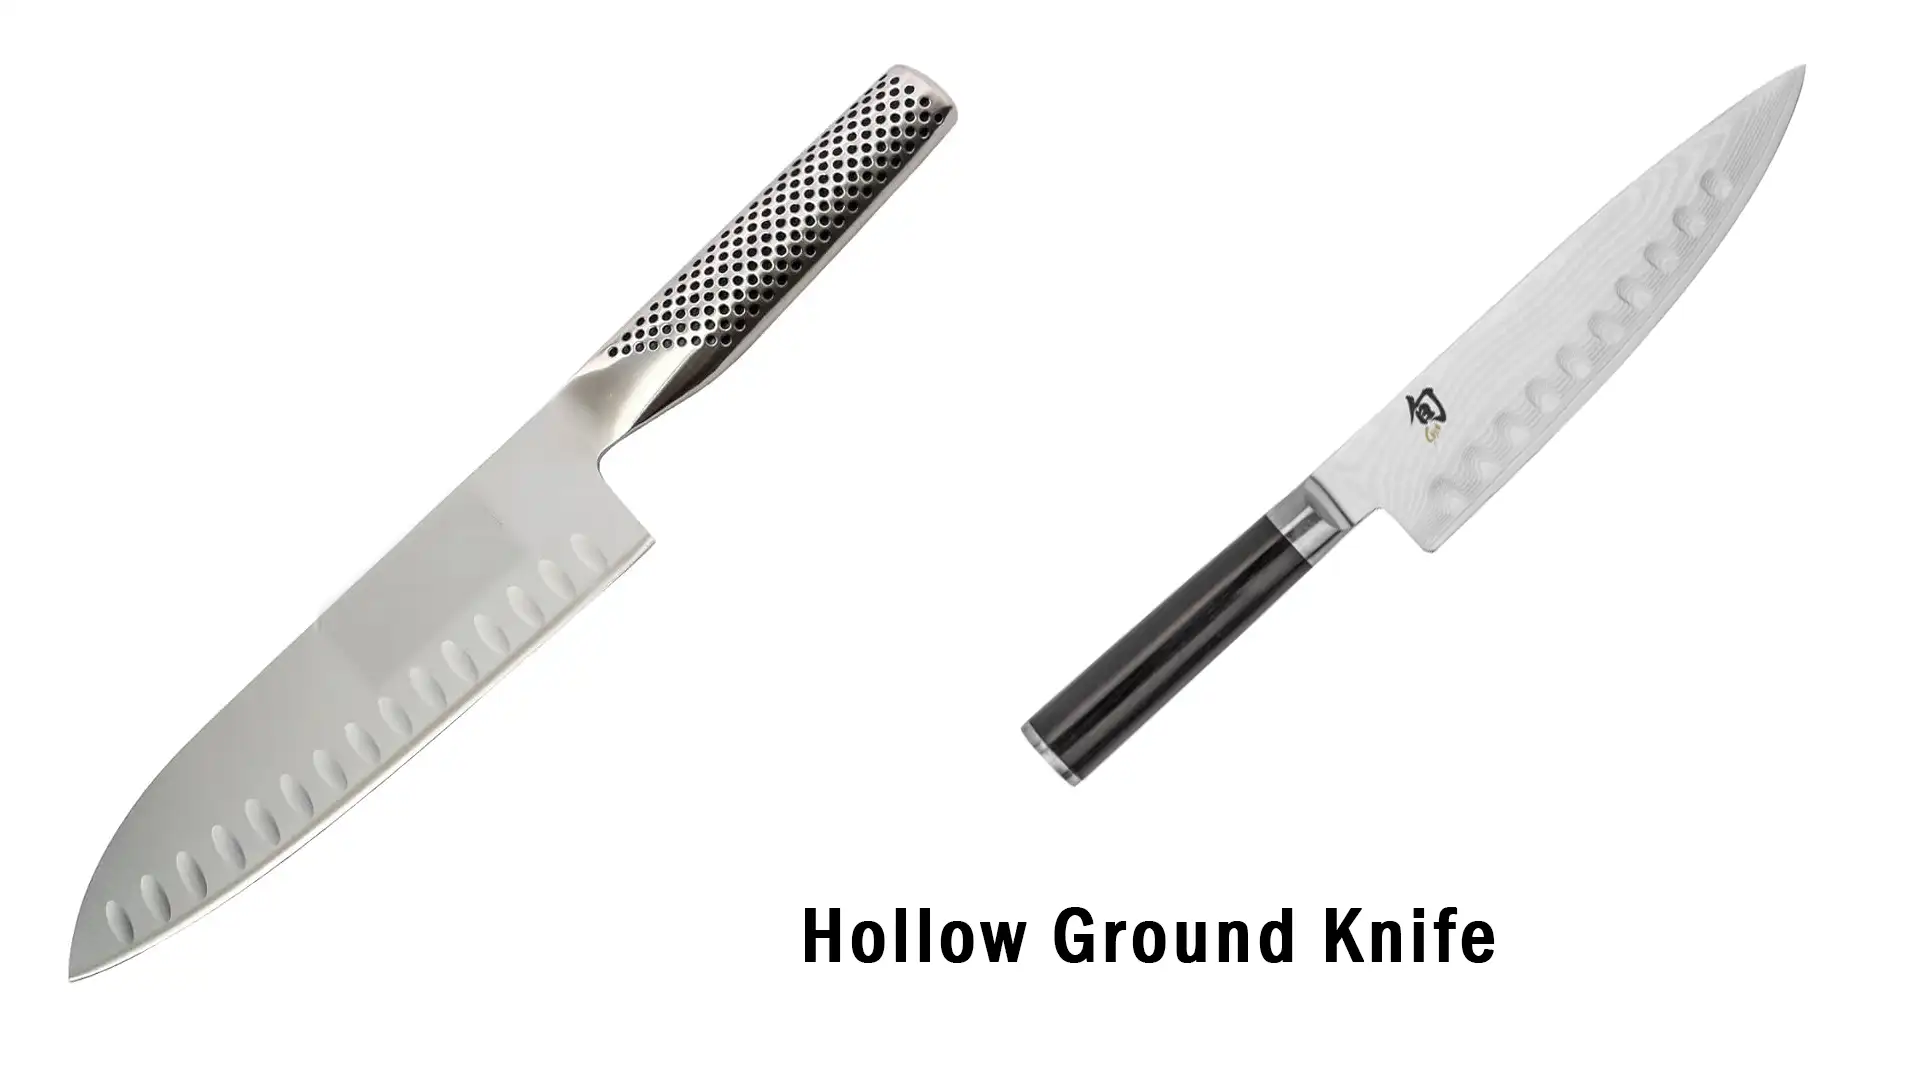 Sharpening Your Hollow Ground Knife